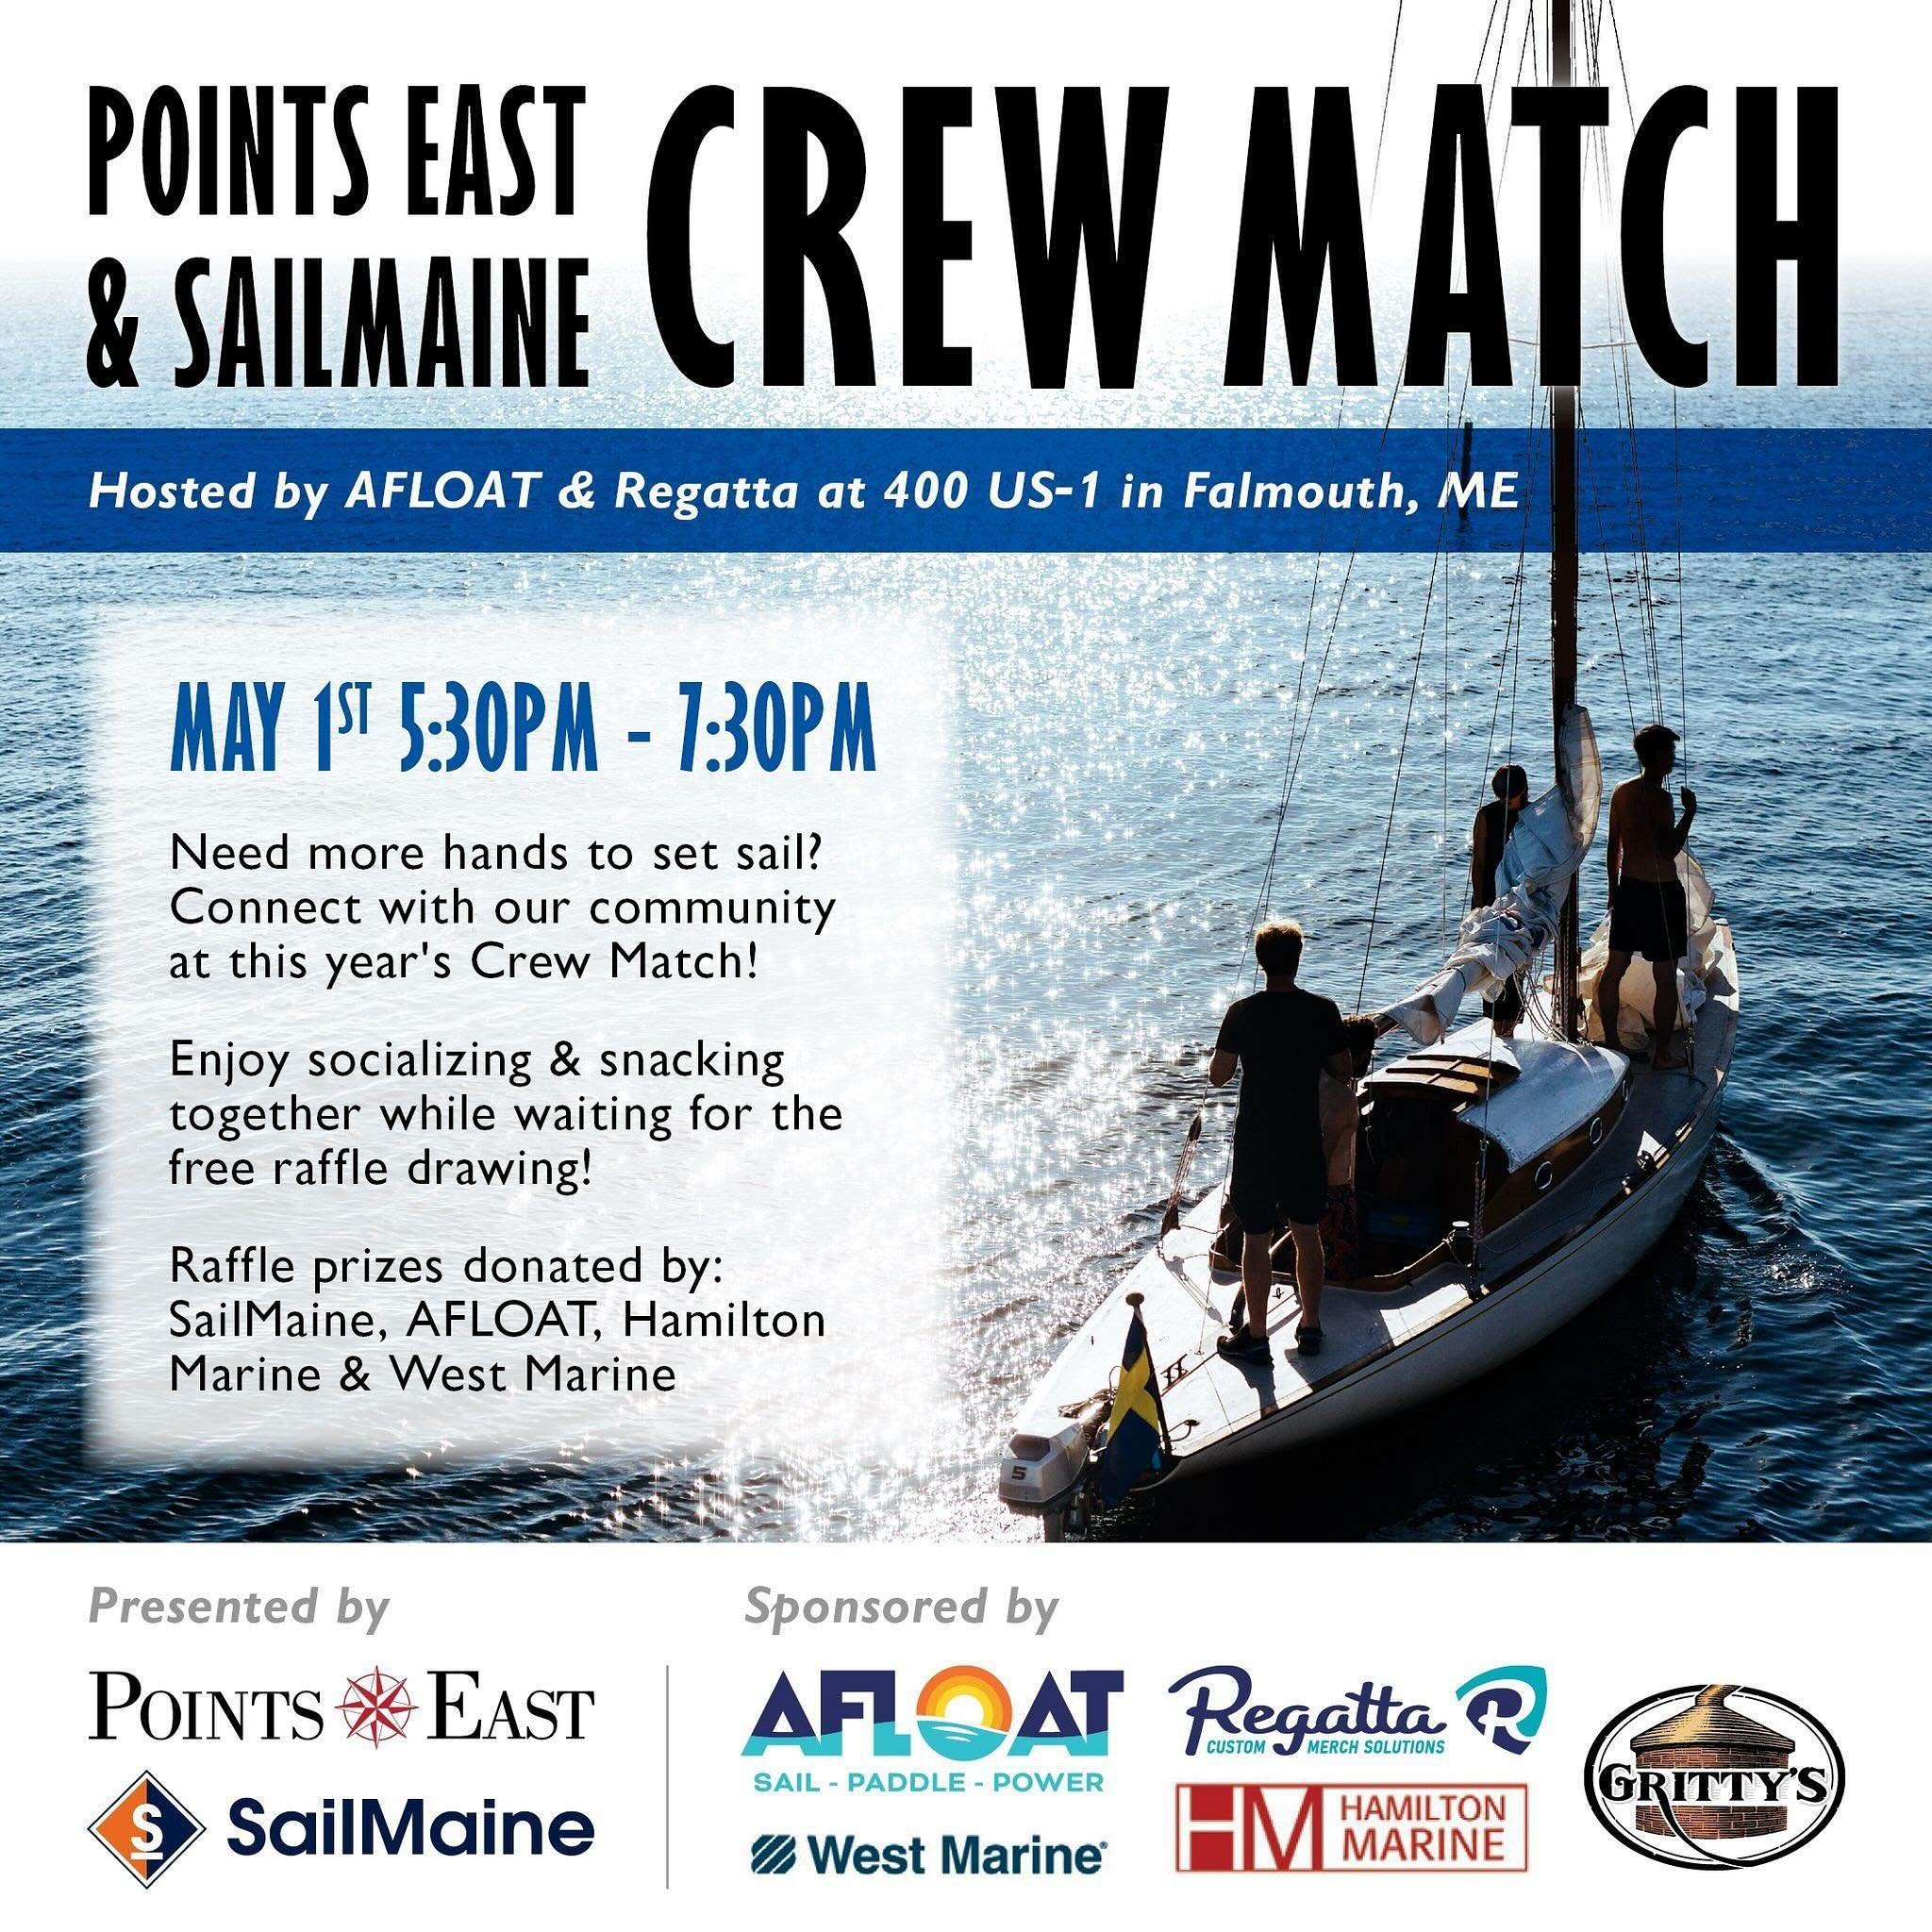 What Is The Best Way To Start The Sailing Season Here In Maine? With A Great Crew Match Party!

On May 1st, from 5:30 PM to 7:30 PM, Points East Magazine and SailMaine are hosting their &ldquo;All Hands On Deck&rdquo; Annual Crew Match Party at Maine